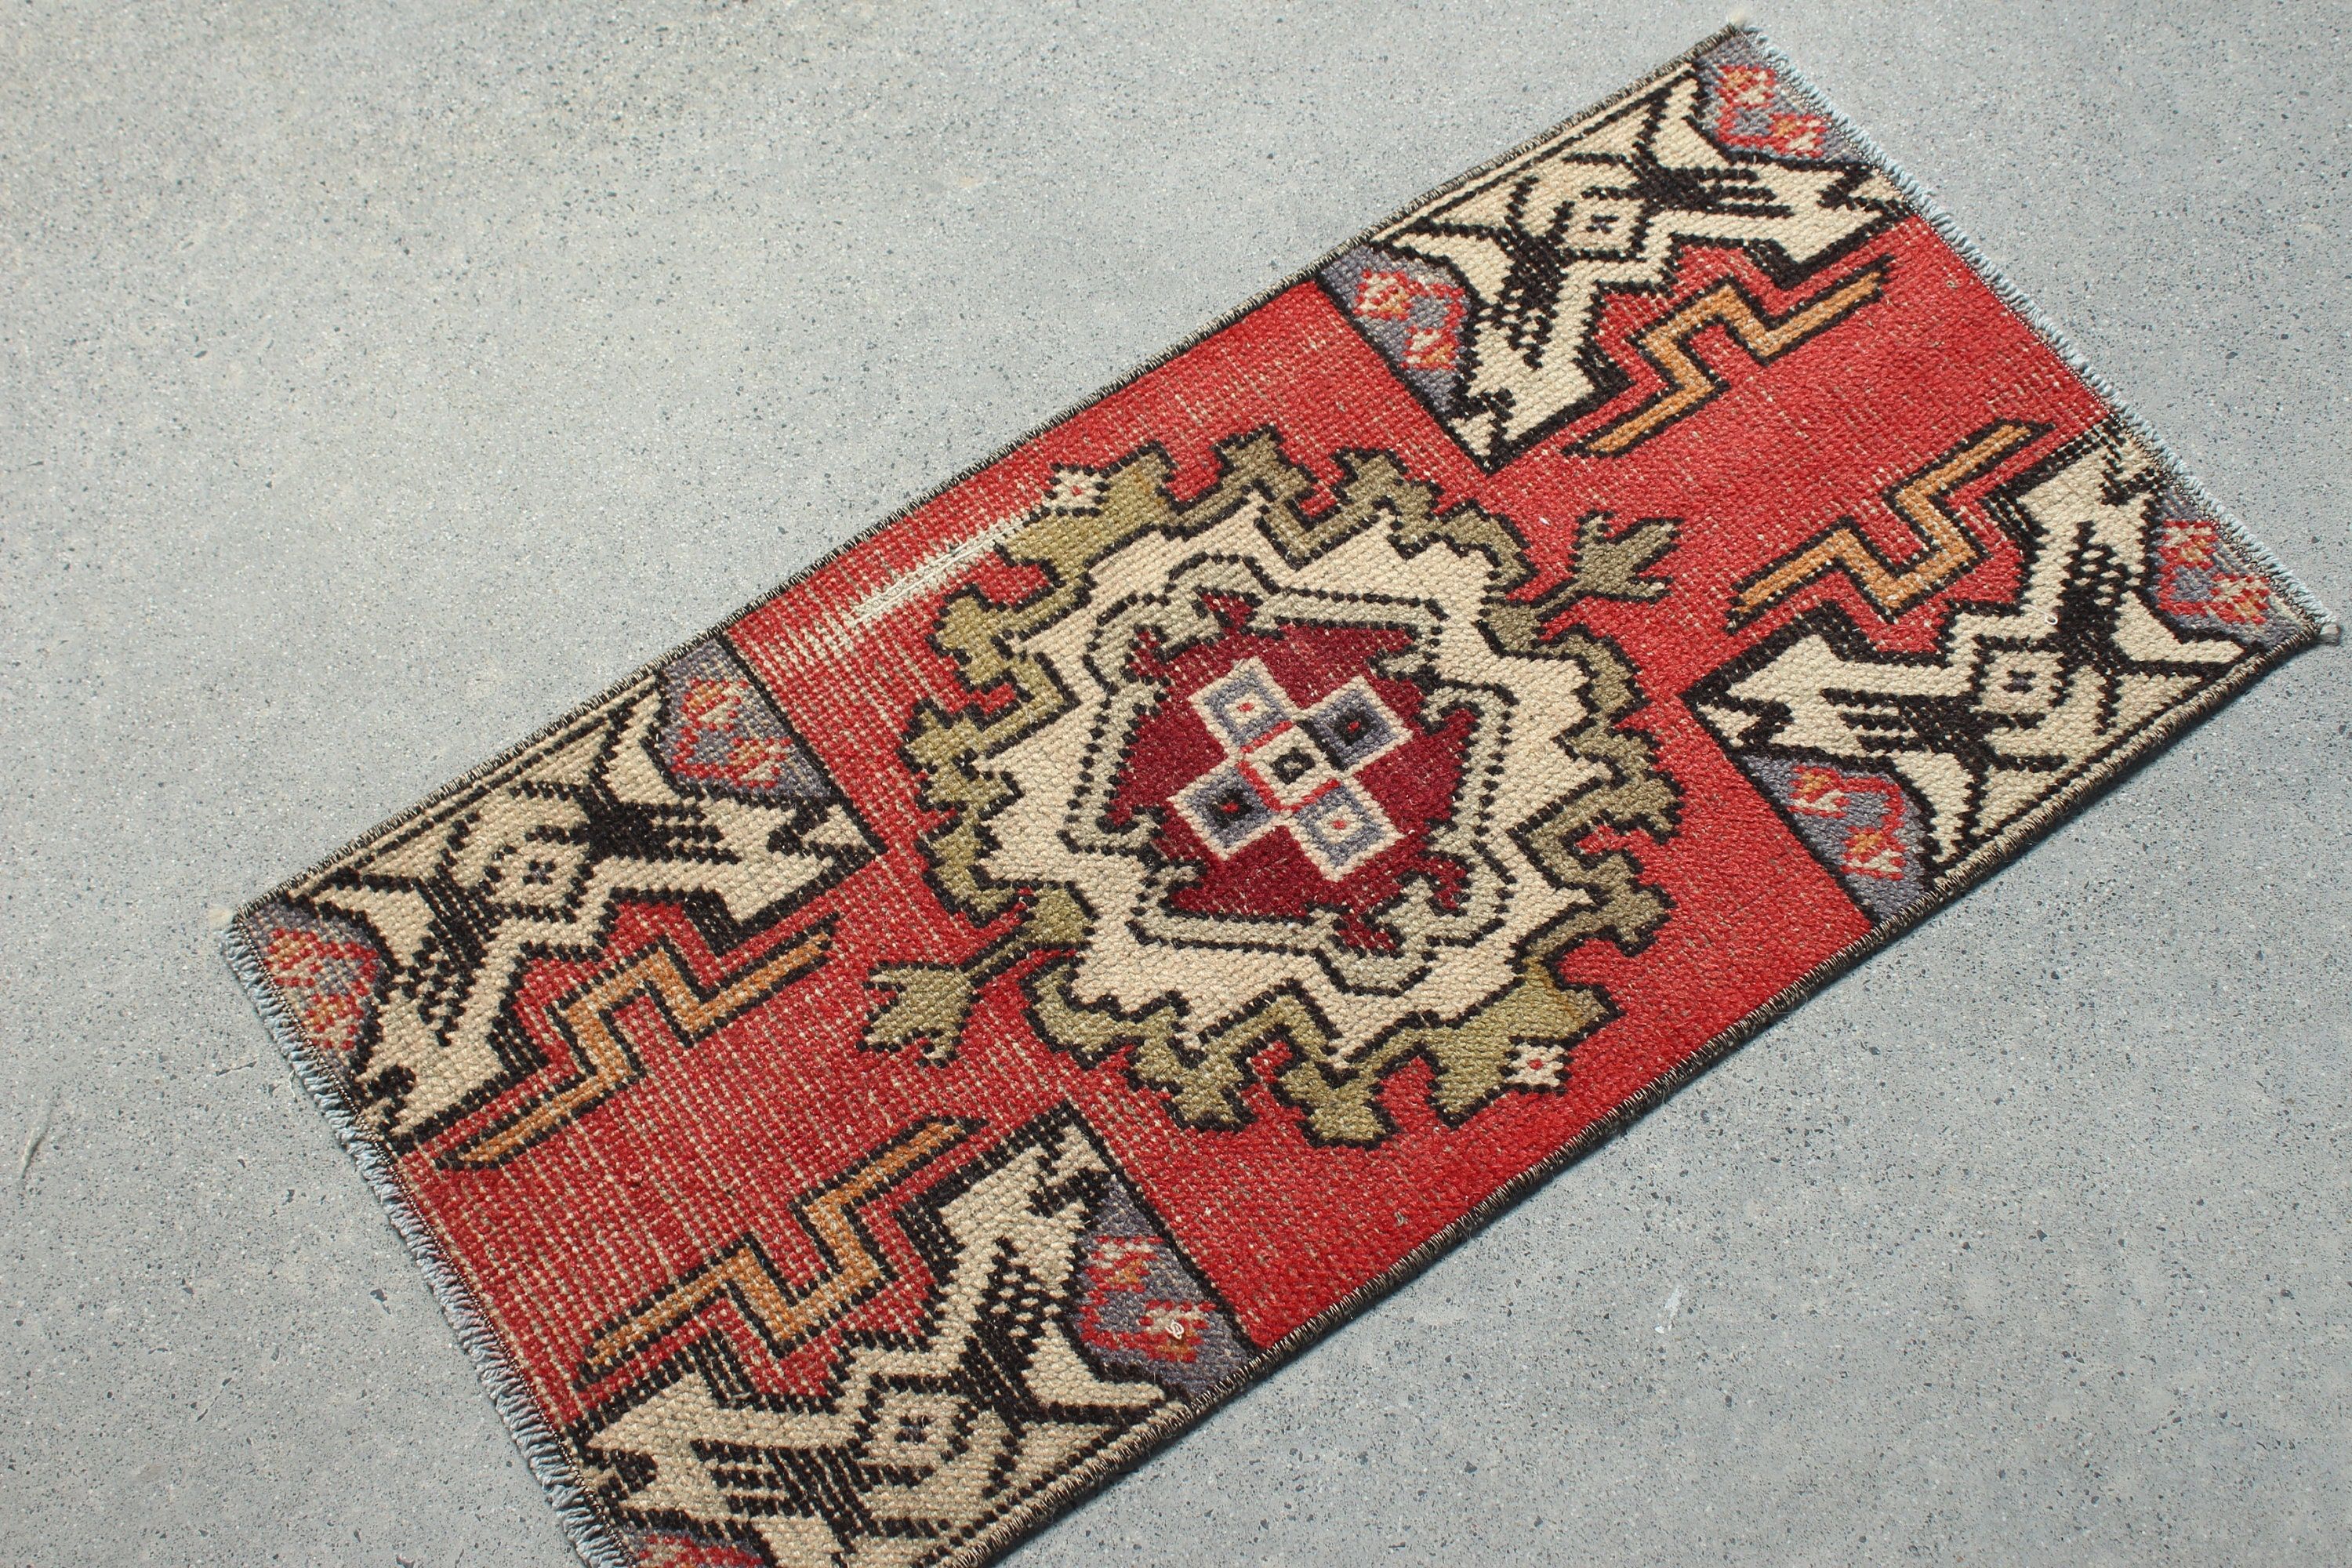 Entry Rug, Floor Rug, Kitchen Rug, Turkish Rugs, Oushak Rug, 1.4x2.8 ft Small Rug, Vintage Rugs, Rugs for Kitchen, Red Home Decor Rug